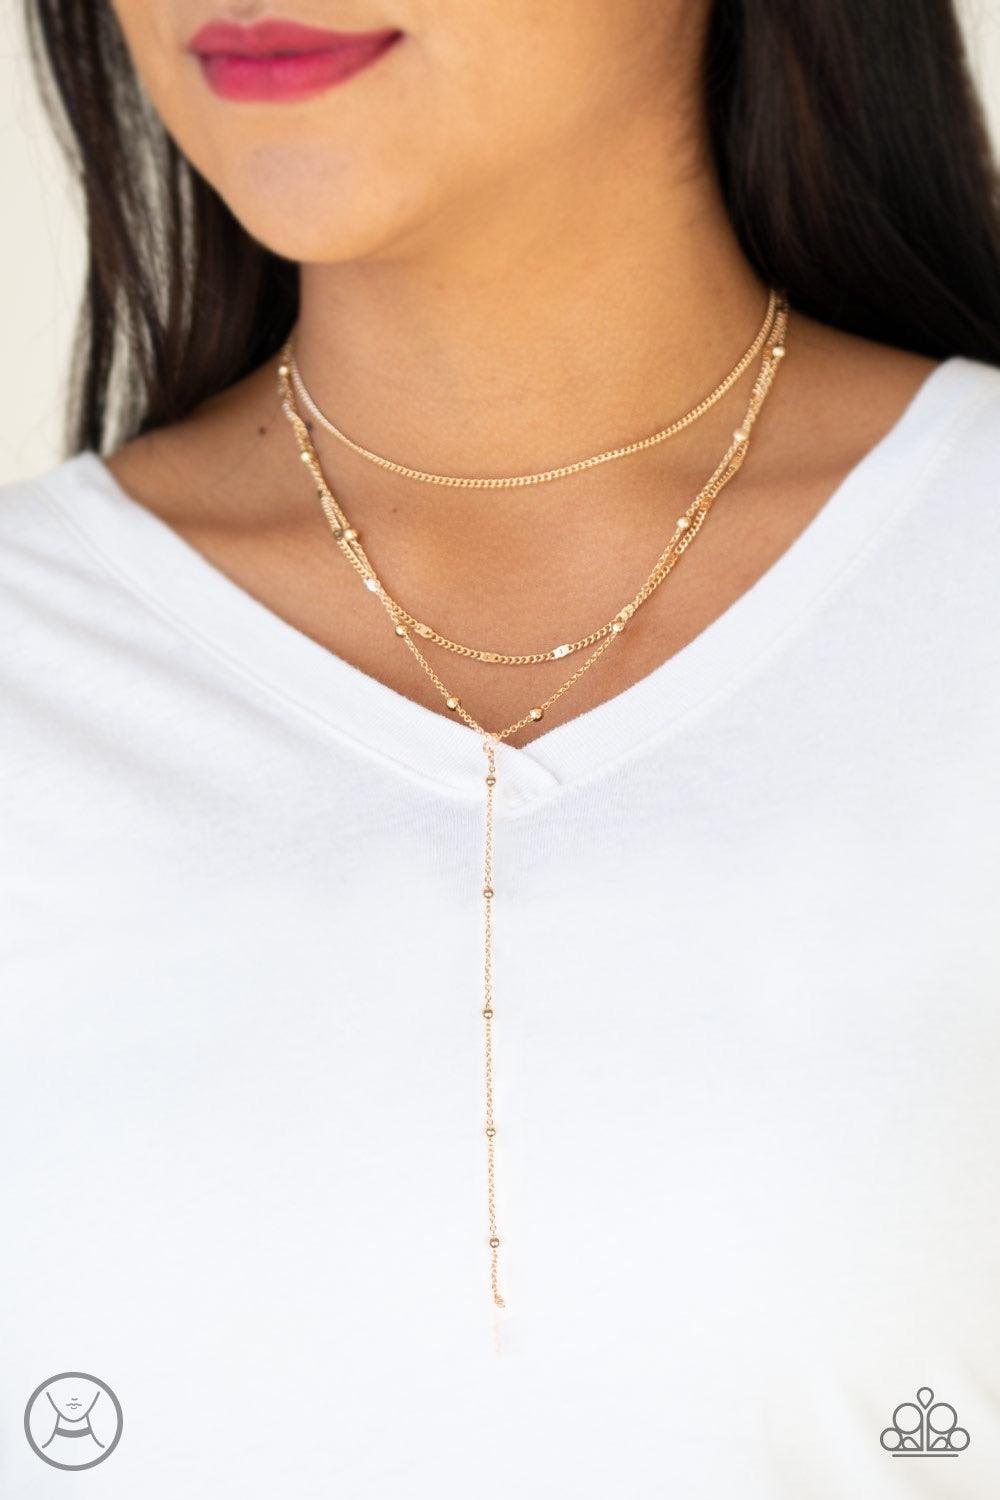 Paparazzi Accessories Think Like A Minimalist - Gold A row of beaded gold chain, a plain gold chain, and a chain featuring flattened links layer around the neck for a minimalist inspired look. Features an adjustable clasp closure. Jewelry